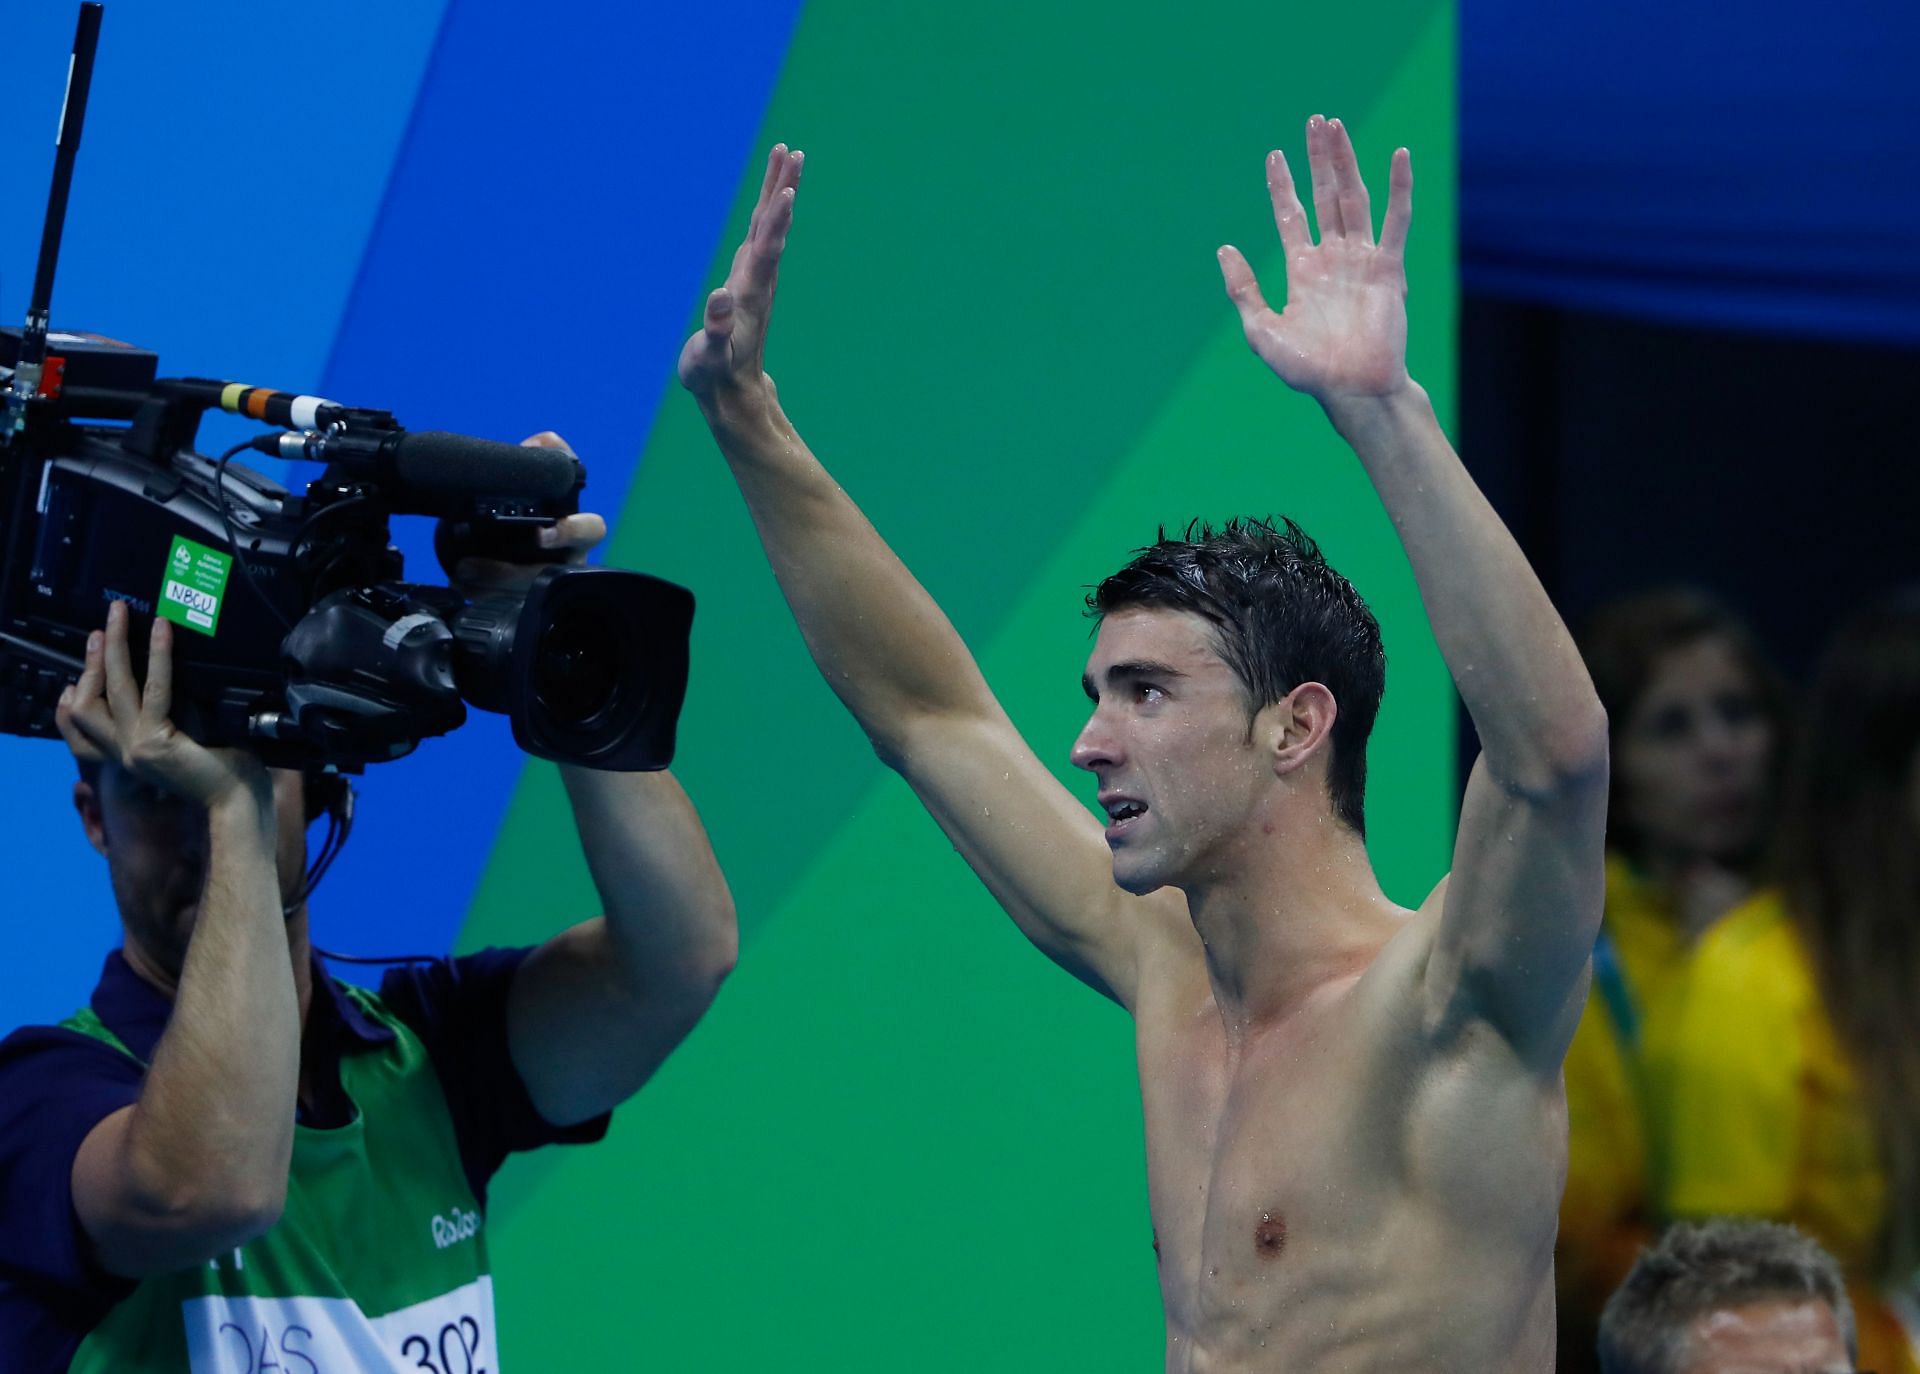 Michael Phelps meets Larisa Latynina in the latest Louis Vuitton's